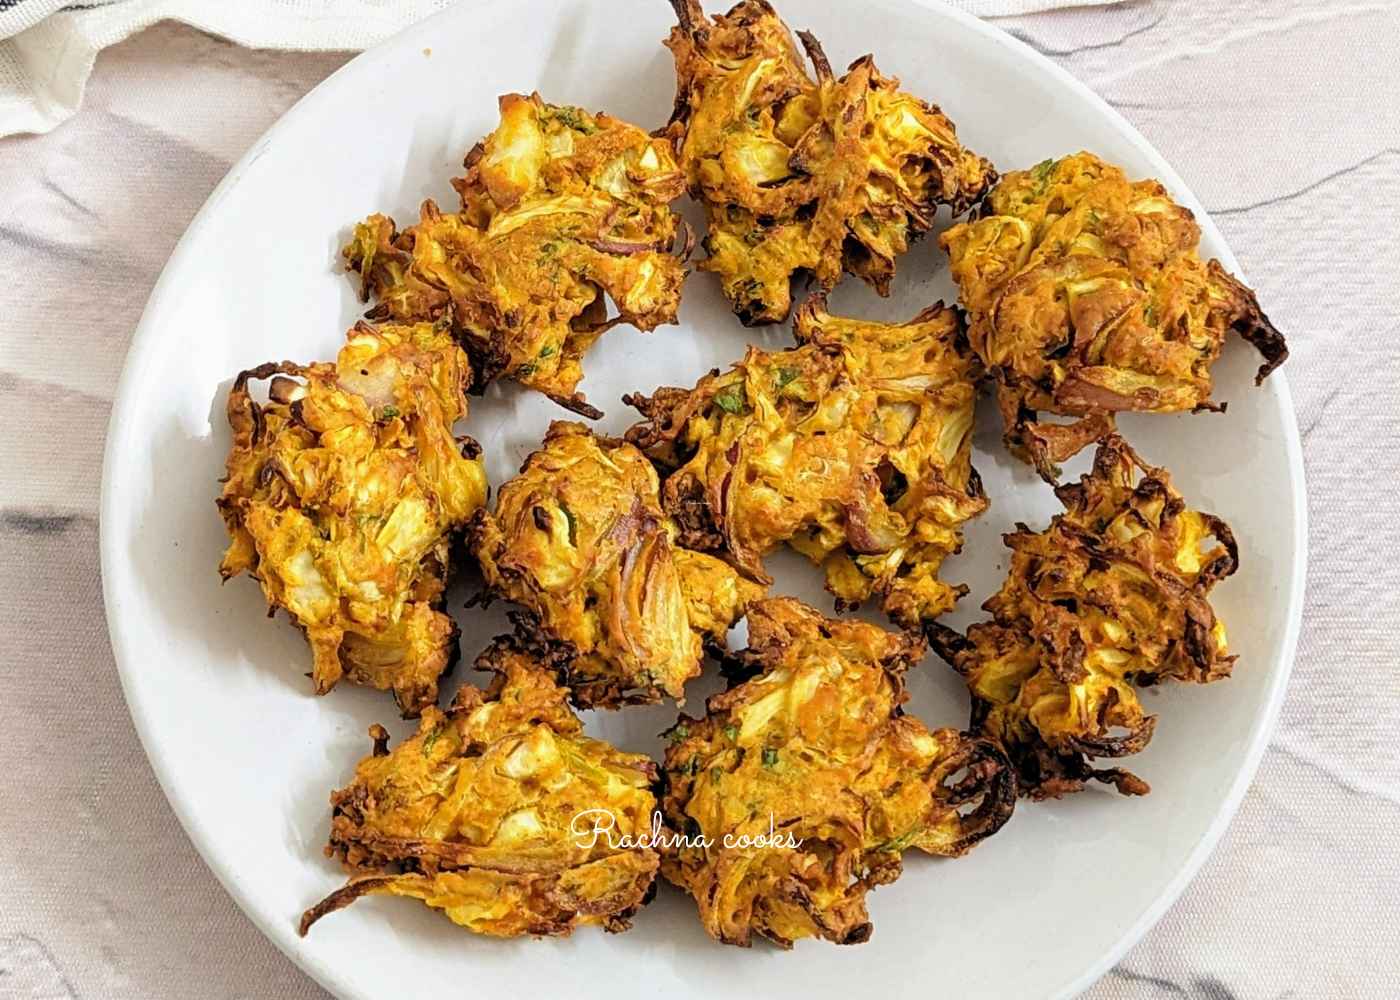 A plate of delicious air fried cabbage pakodas on a white plate.